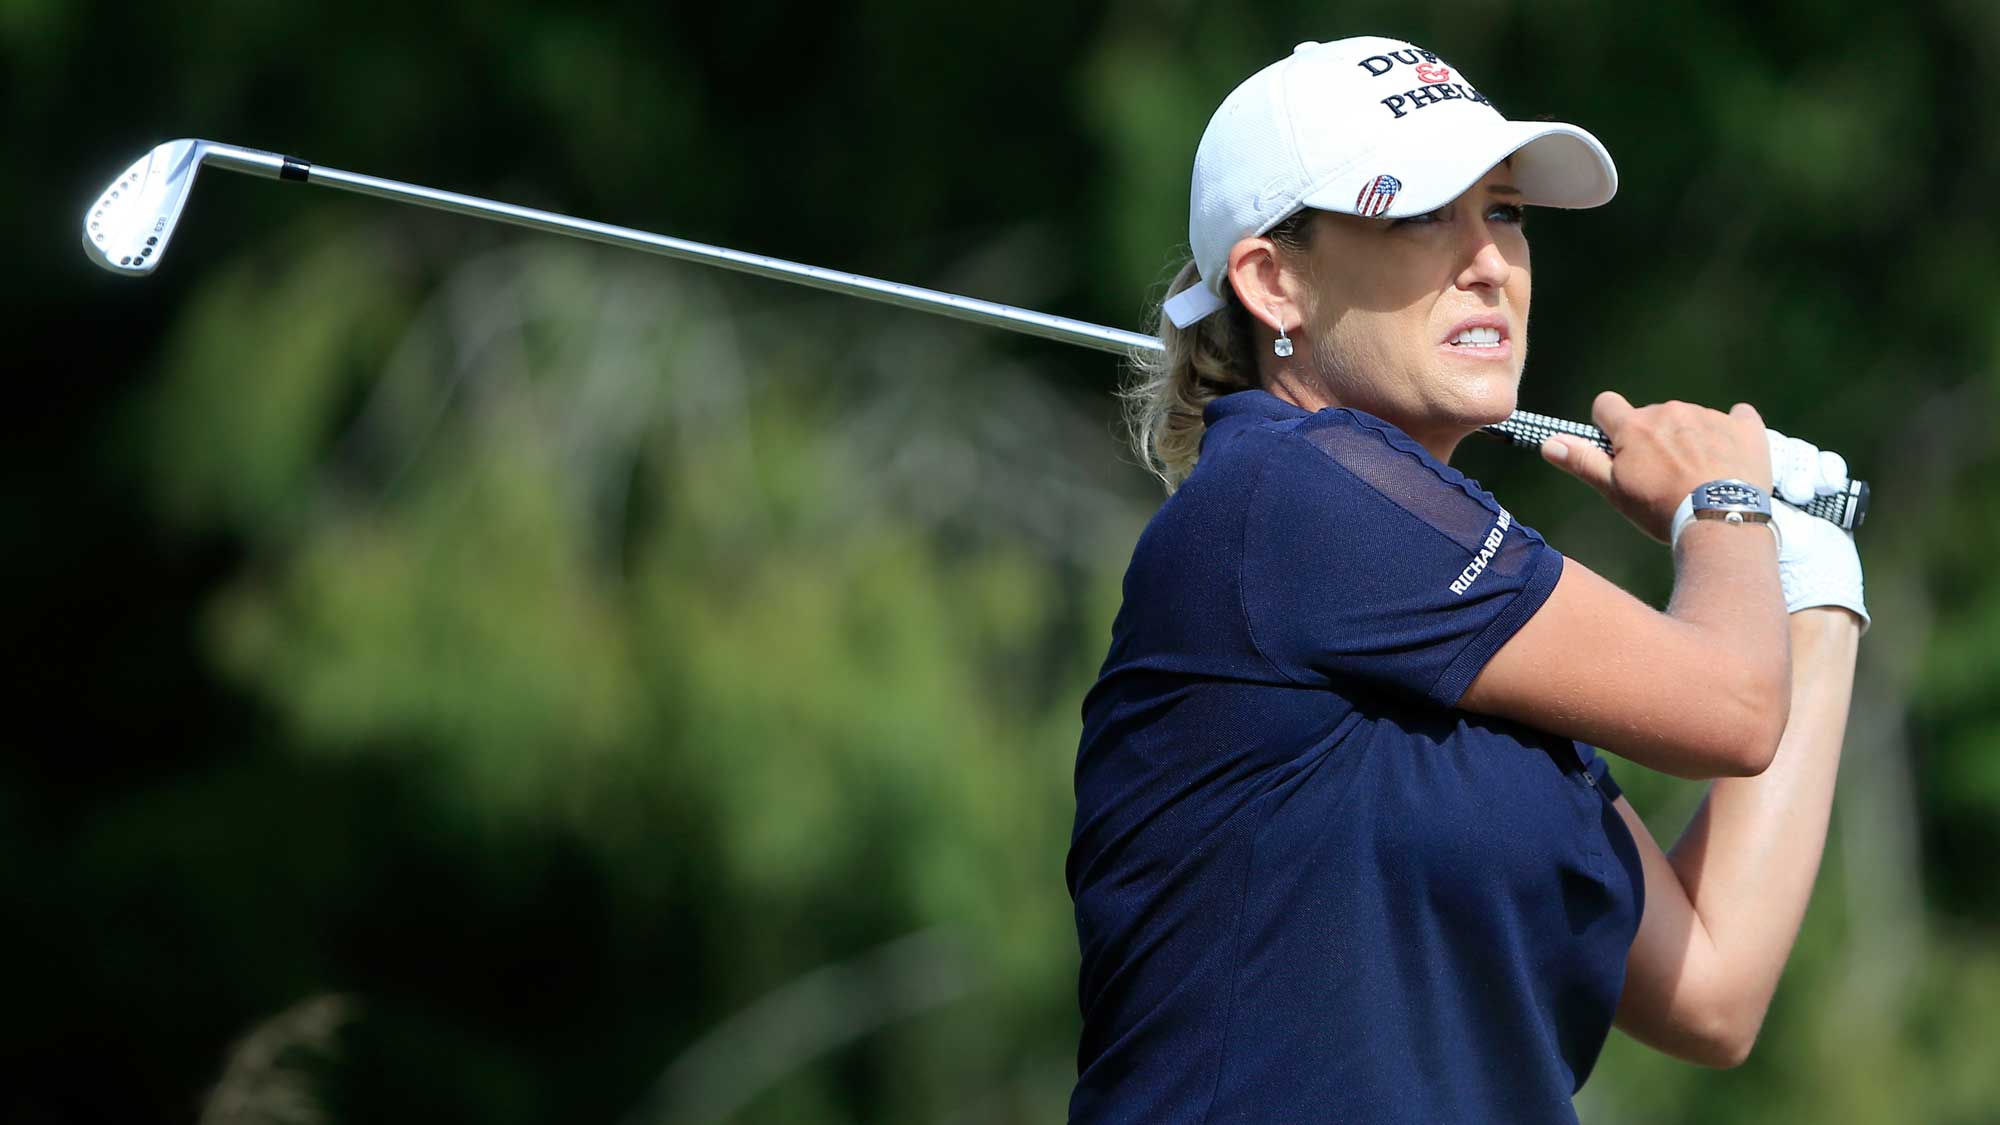 Cristie Kerr of the United States plays a shot on the fifth tee during the final round of the CME Group Tour Championship at Tiburon Golf Club